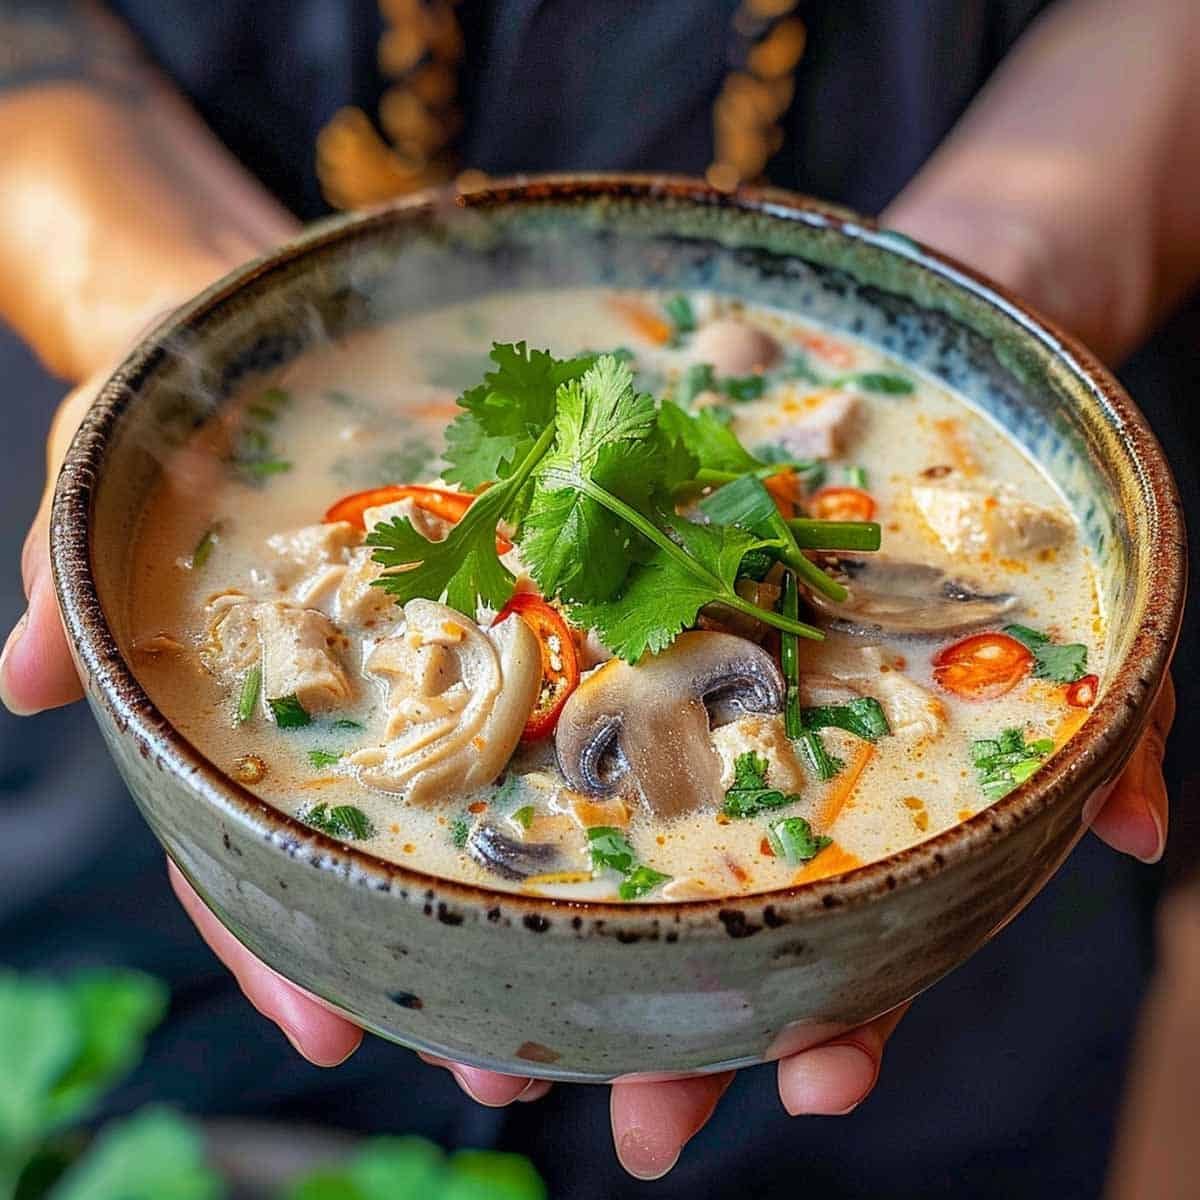 A bowl of Thai Coconut Chicken Soup (Tom Kha Gai) with creamy coconut milk broth, chicken, mushrooms, cilantro, kaffir lime leaves, and chili slices